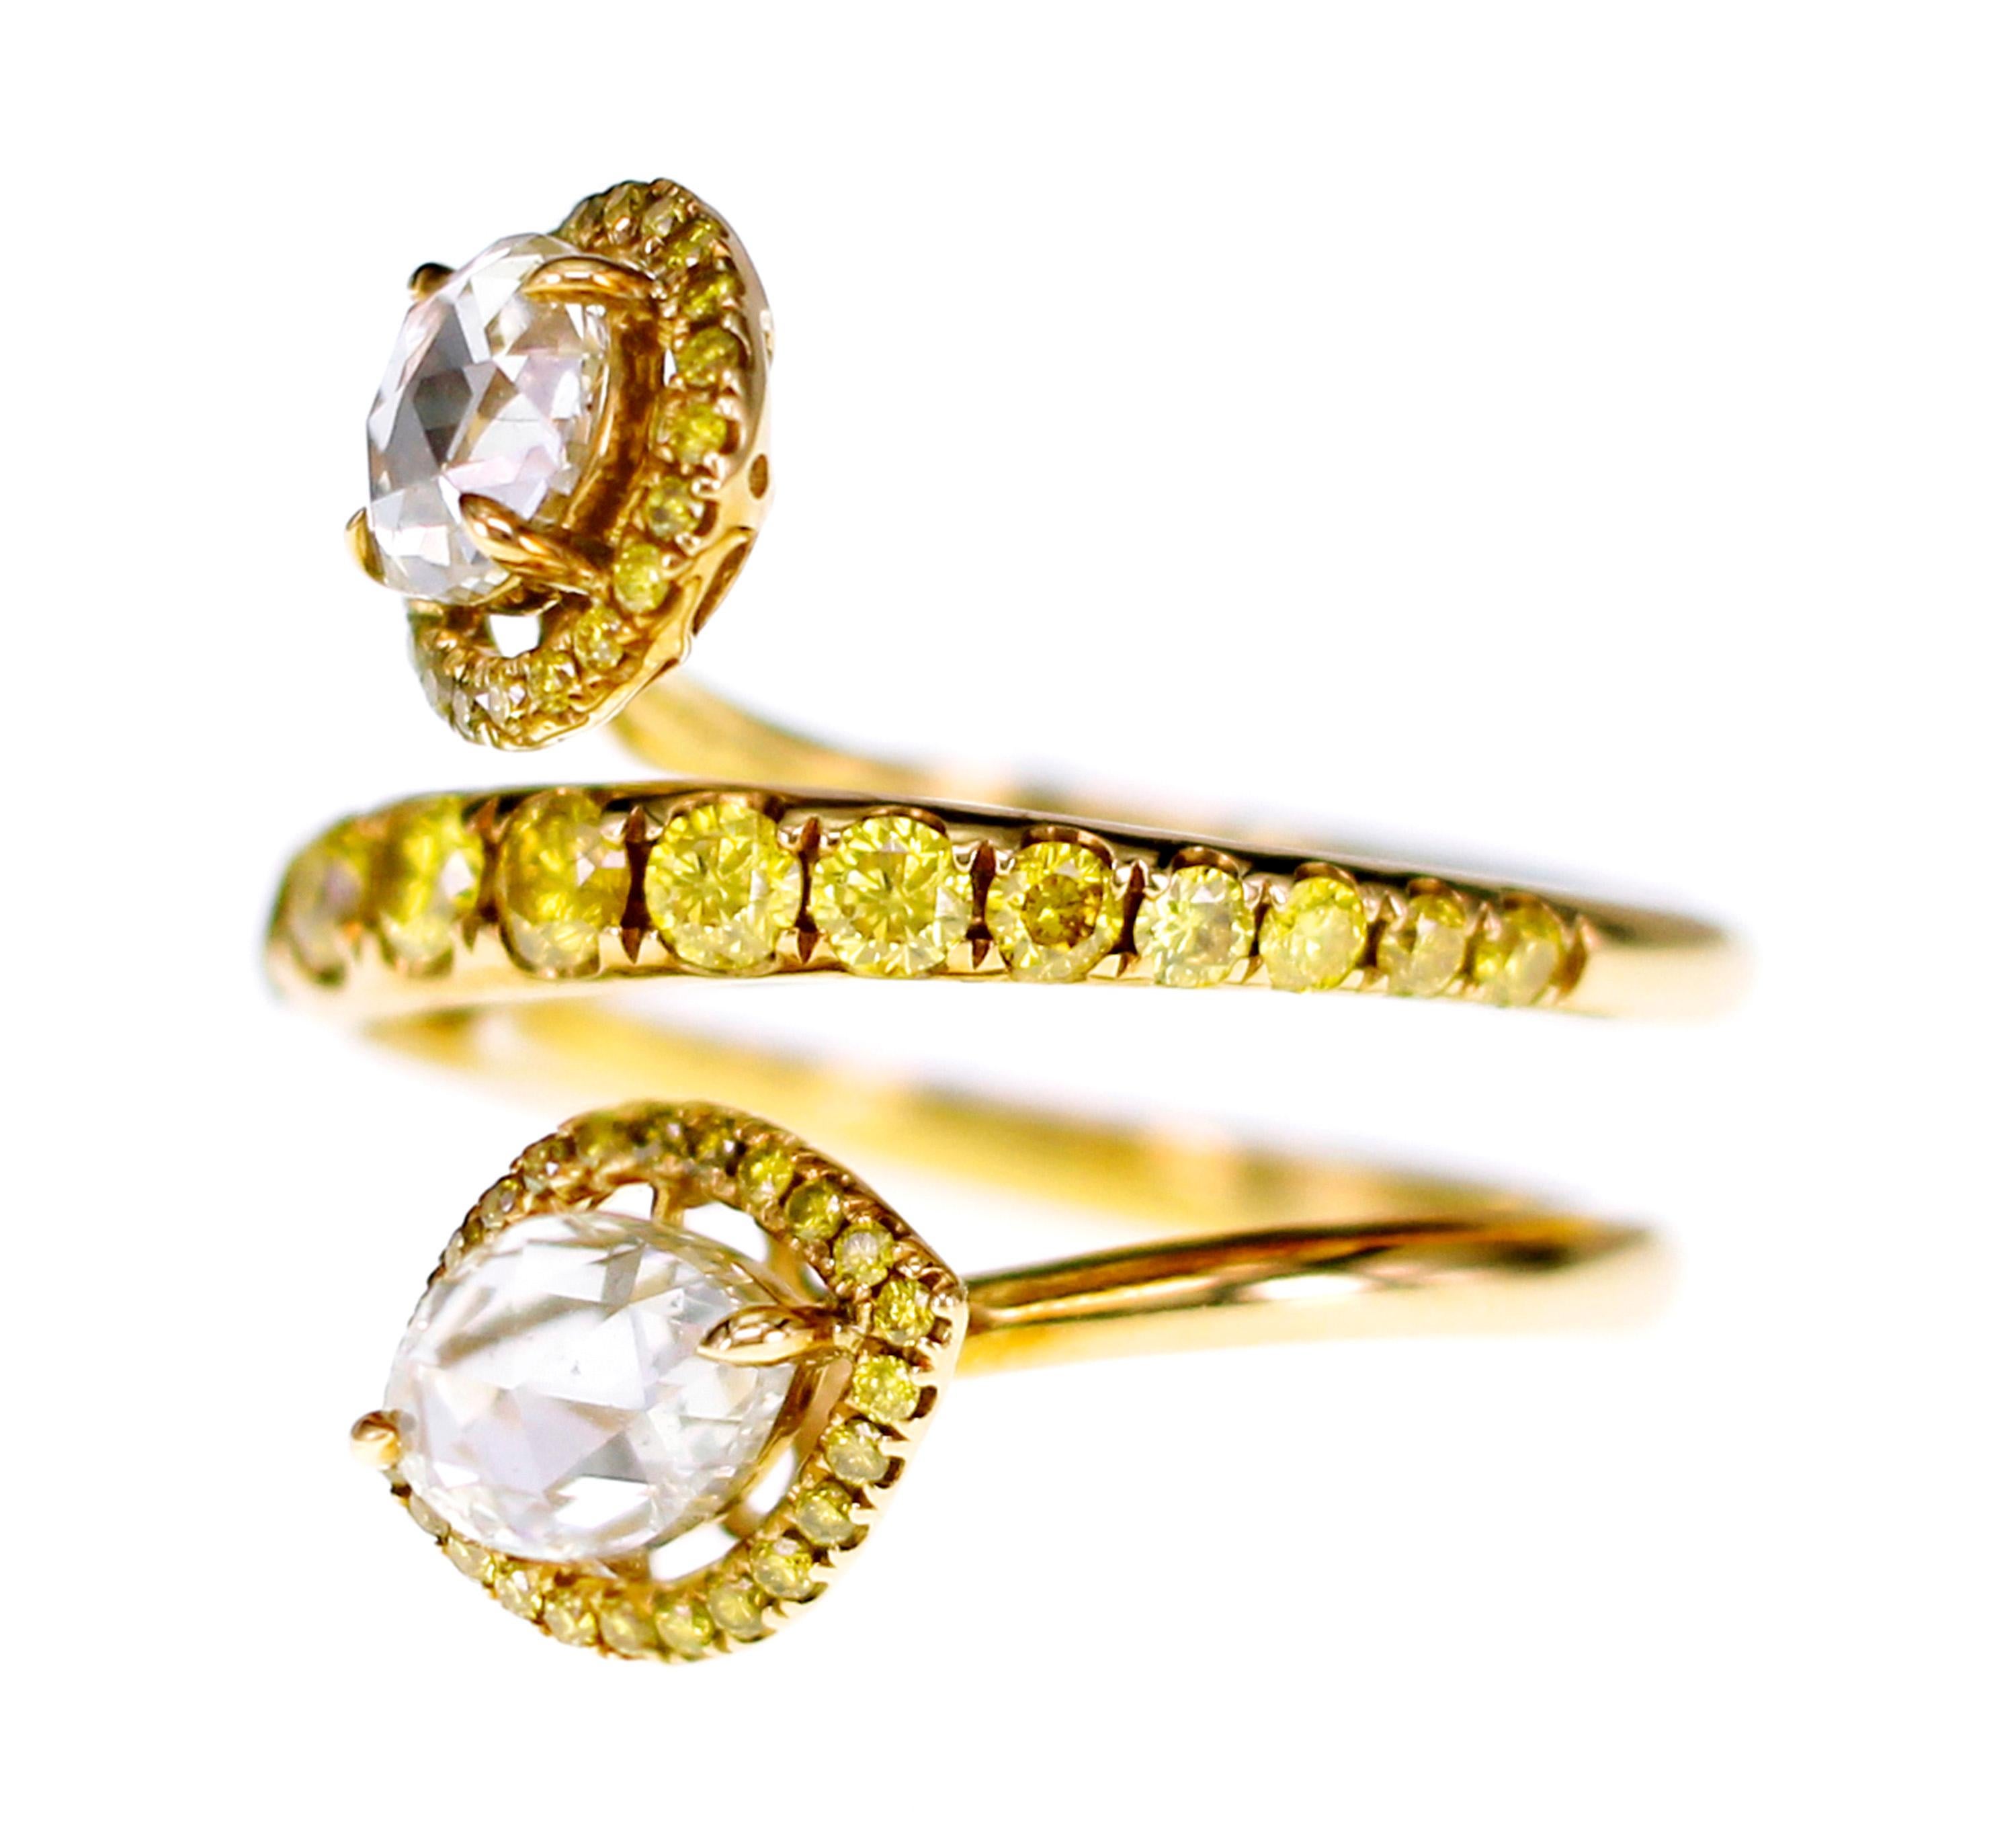 Inspired by a snake, 2 pieces of Natural fancy yellow diamond rose cut are accompanied by one carat of vivid yellow round diamond in melee size.
One of our hot selling designs